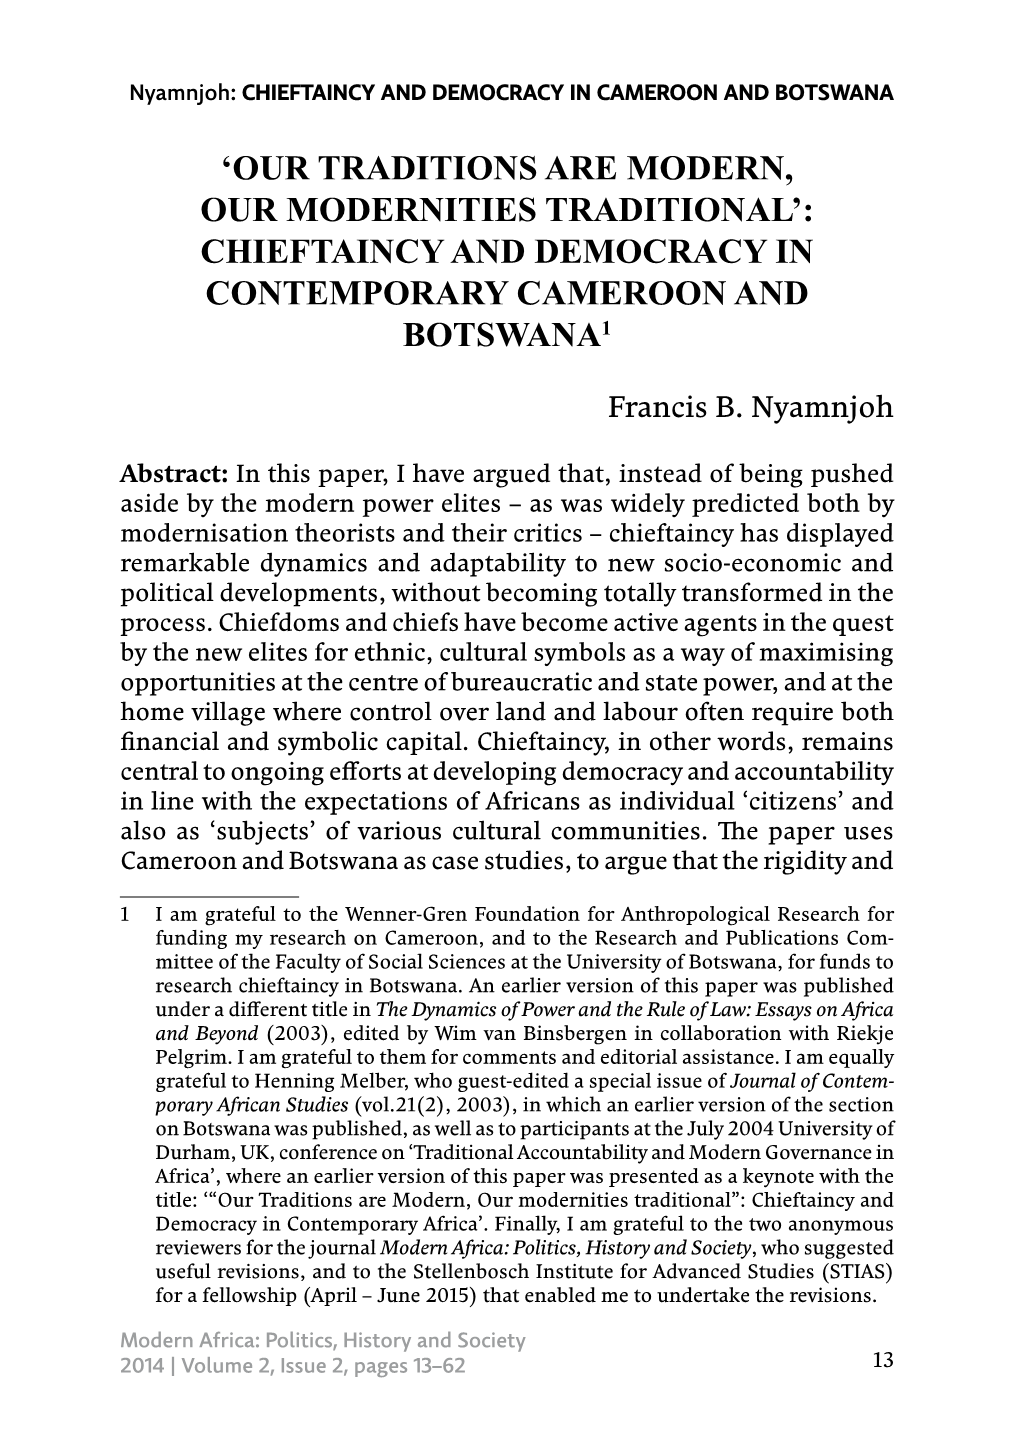 Chieftaincy and Democracy in Contemporary Cameroon and Botswana1